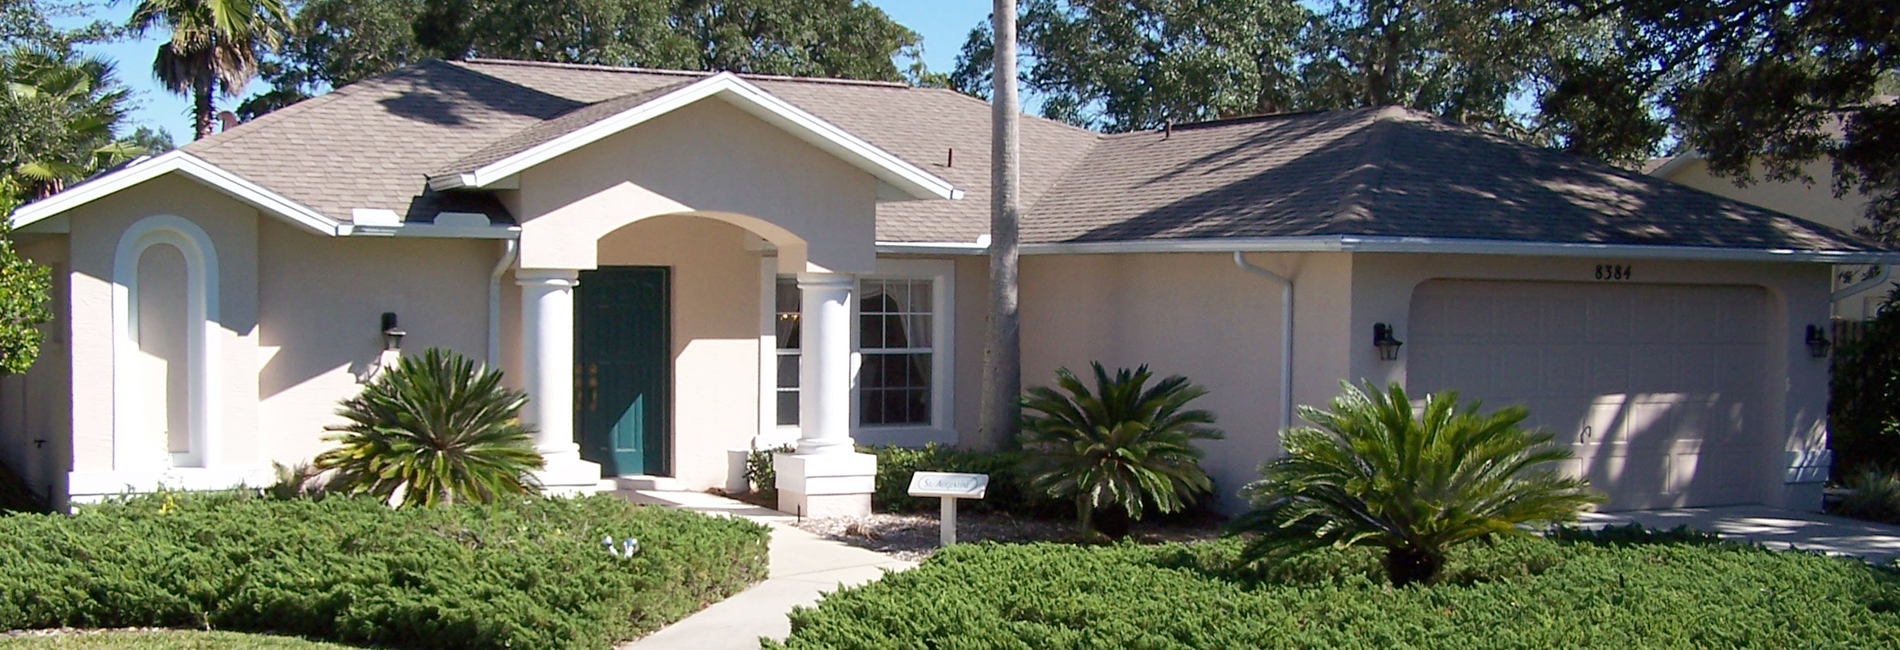 The St. Augustine Artistic Home